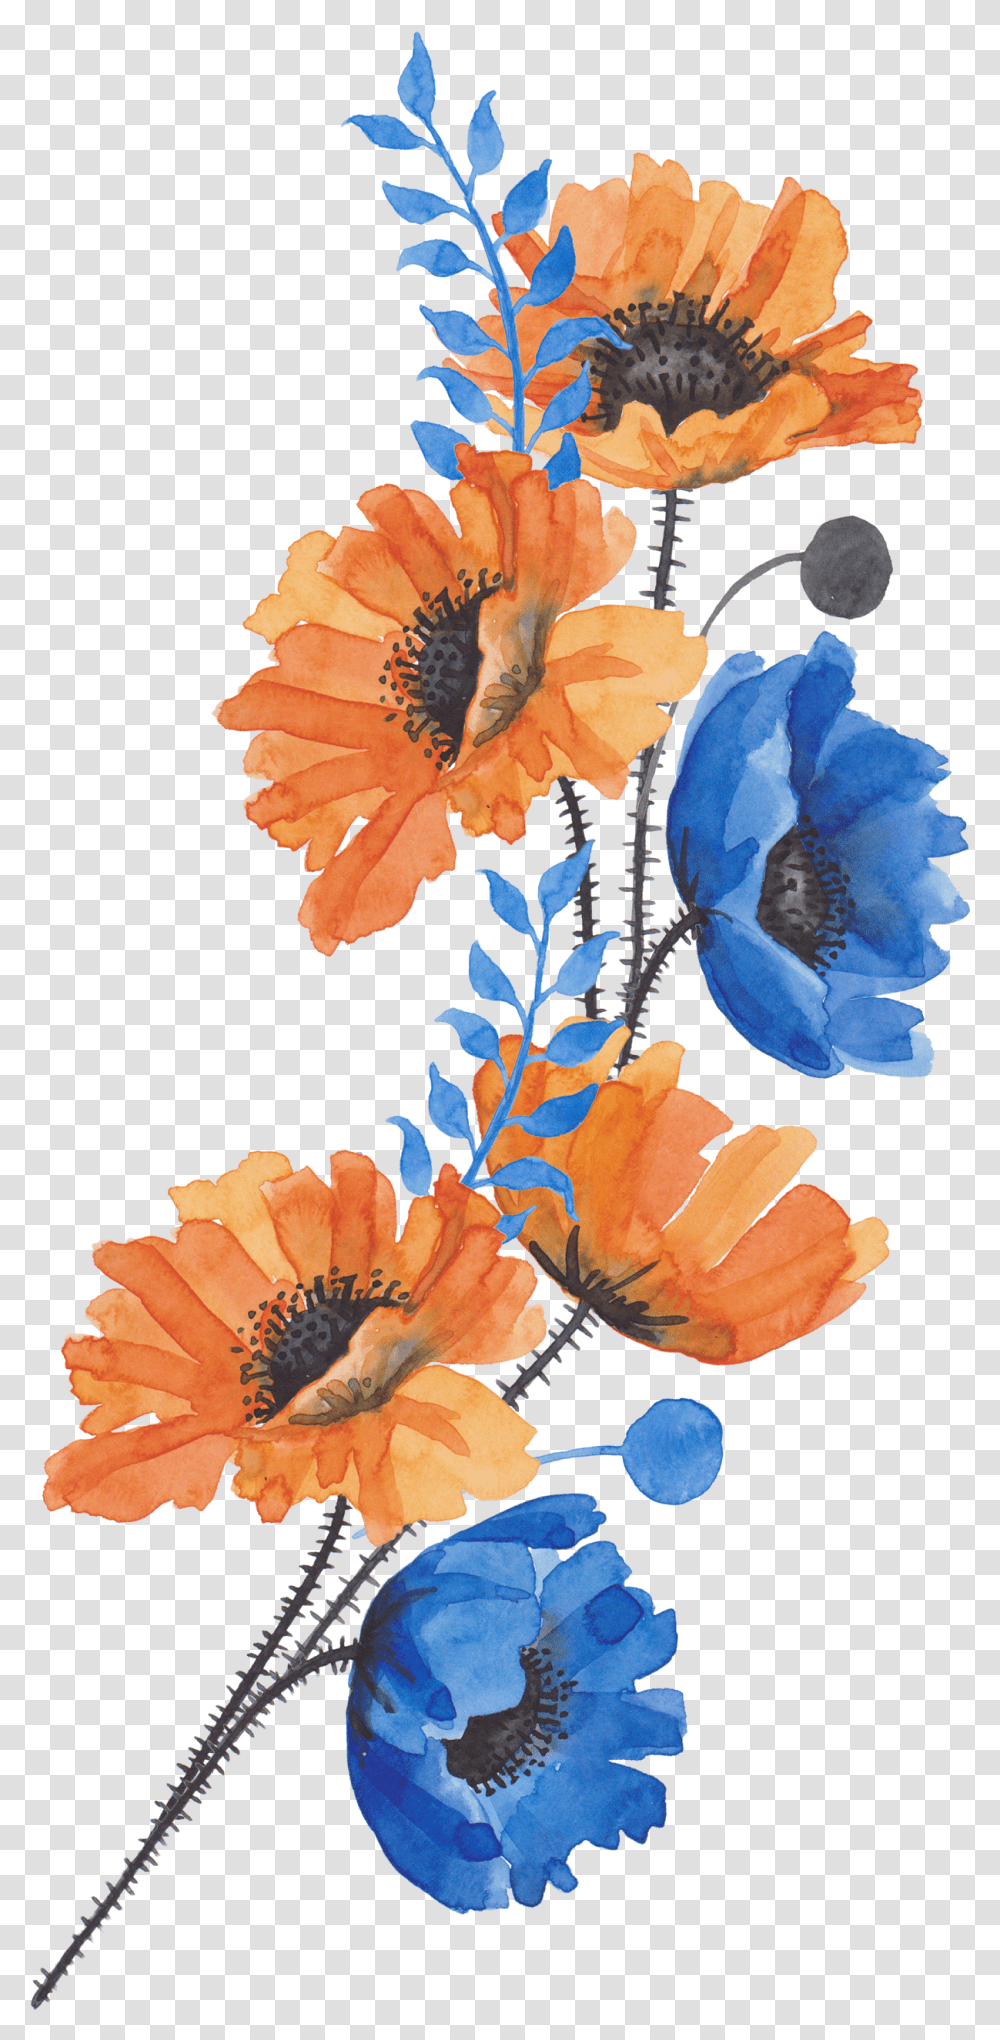 Bouquet Of Flowers Image Of Bouquet Of Flower Blue And Orange Flower, Plant, Anther, Pollen, Floral Design Transparent Png